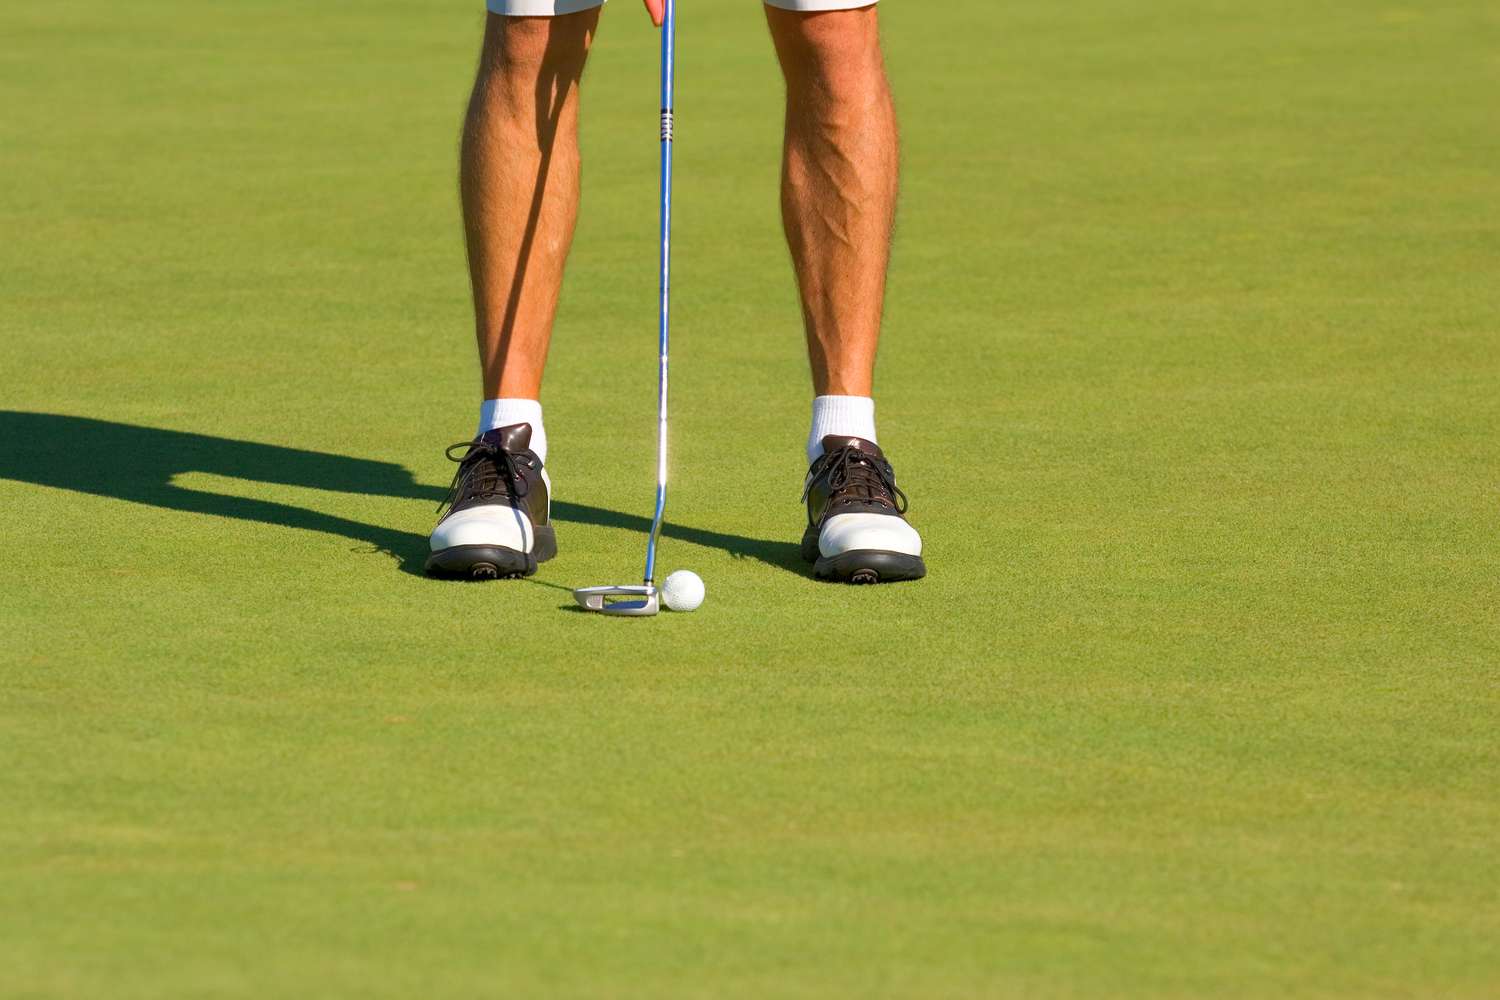 view of man's leg putting on golf course